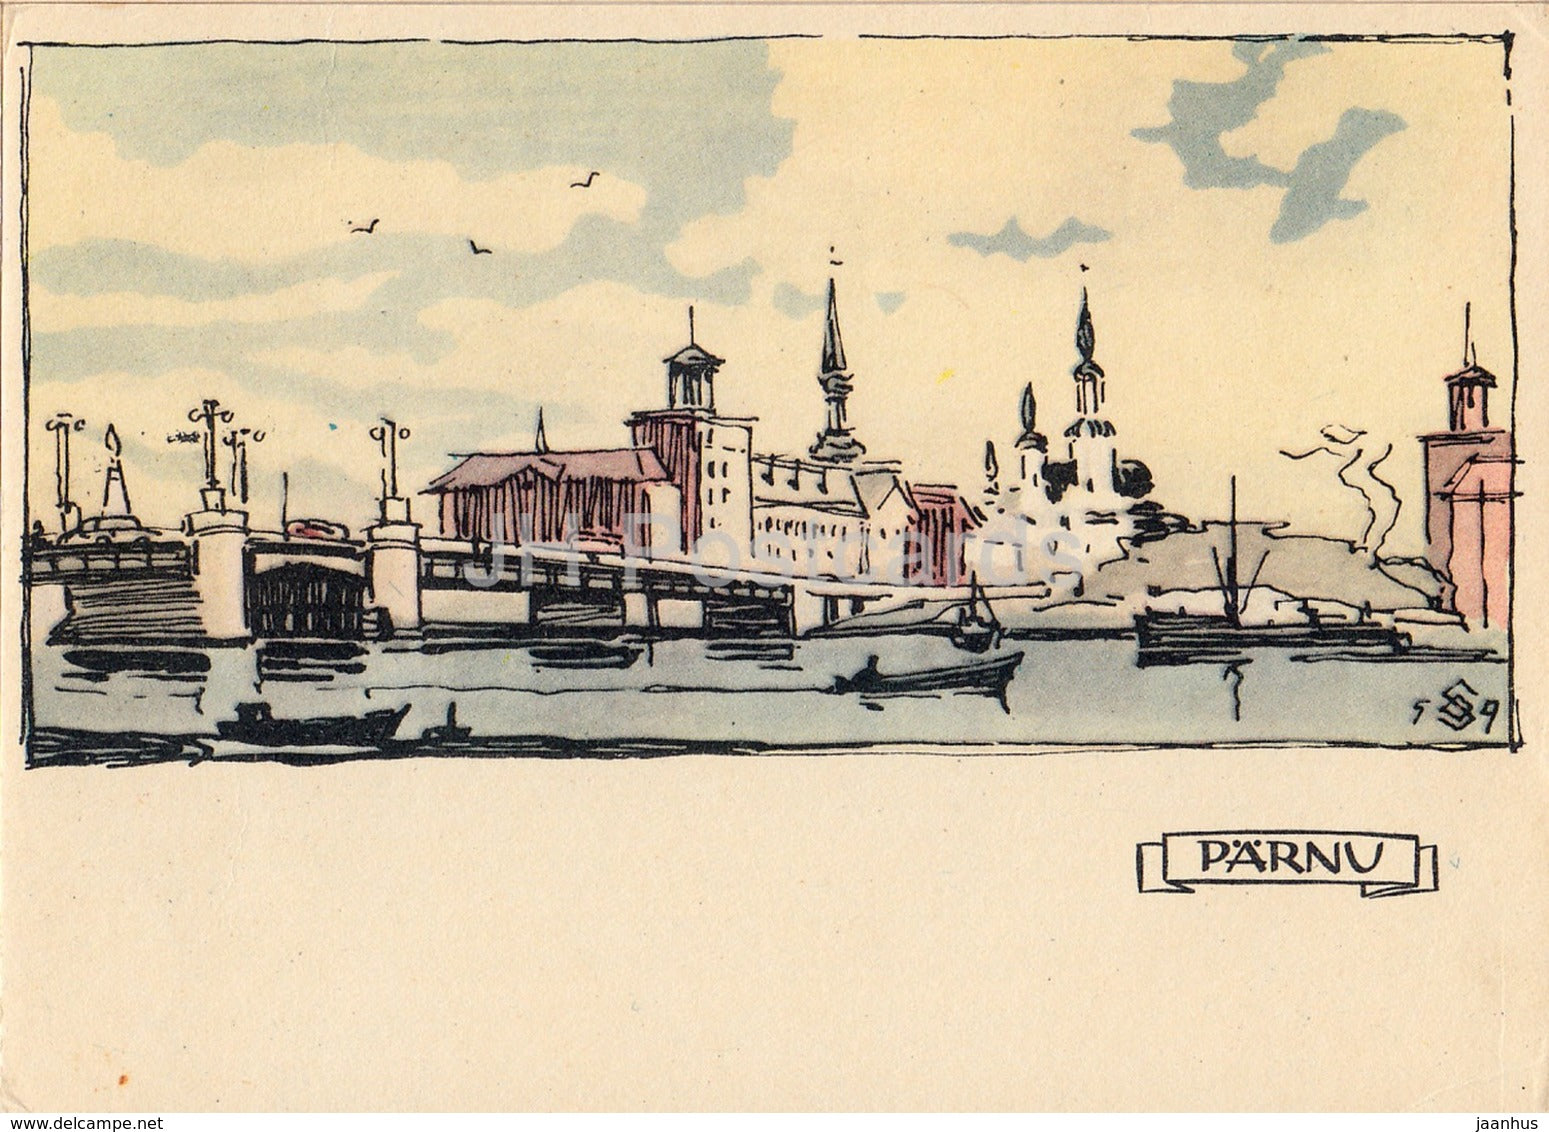 view from the river - bridge - Parnu - Illustration by O. Soans - 1960 - Estonia USSR - unused - JH Postcards